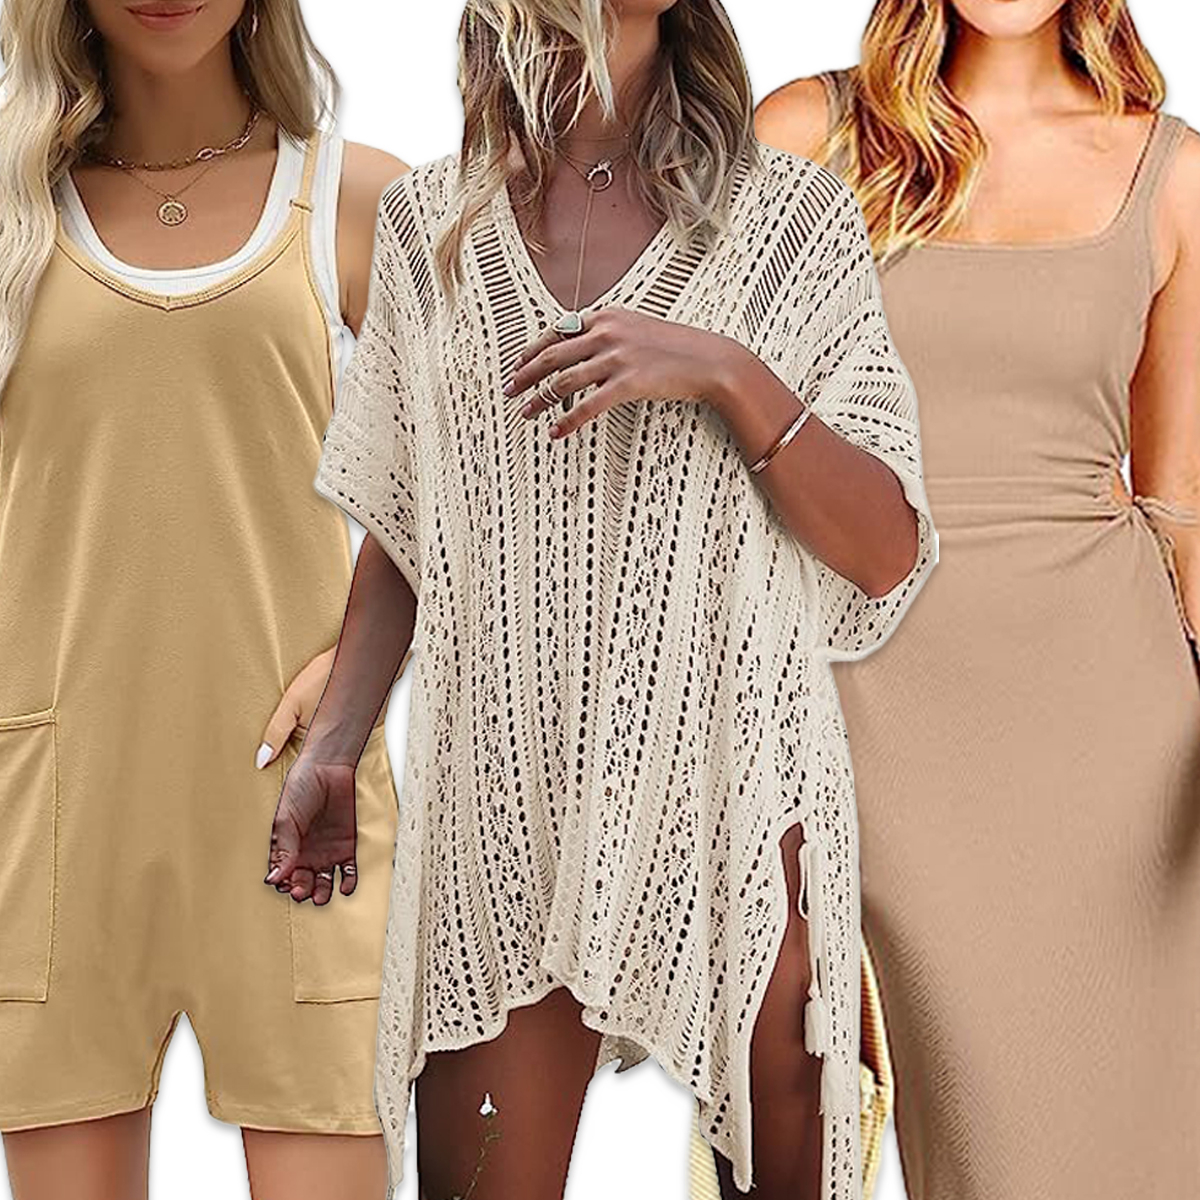 Step up Your Fashion With the Top 17 Trending Amazon Styles Right Now